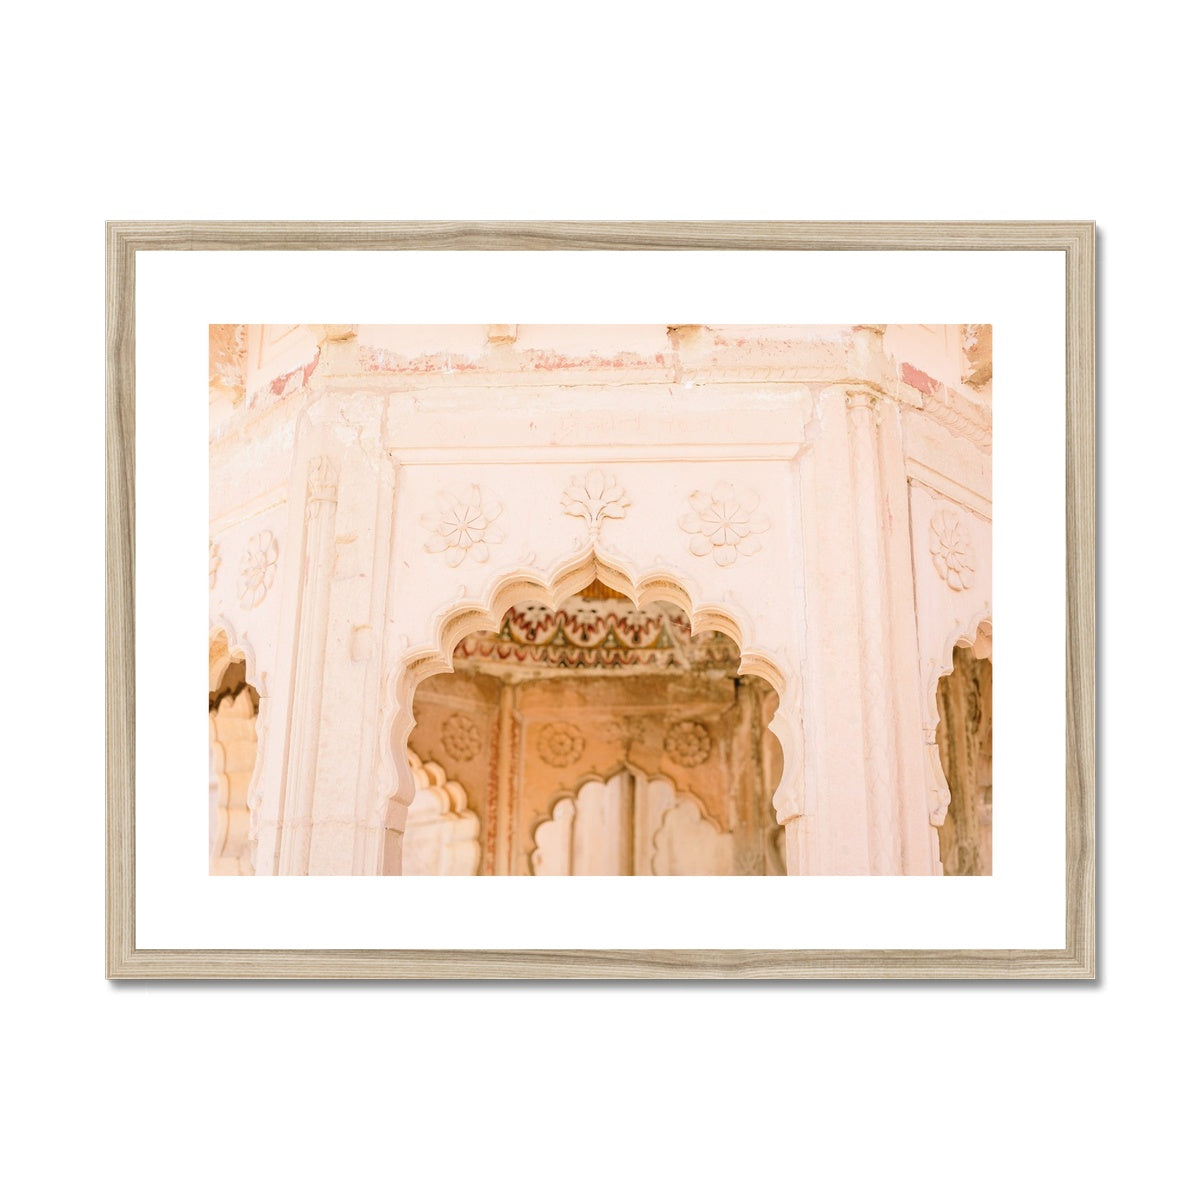 ARCHITECTURE OF INDIA Framed & Mounted Print